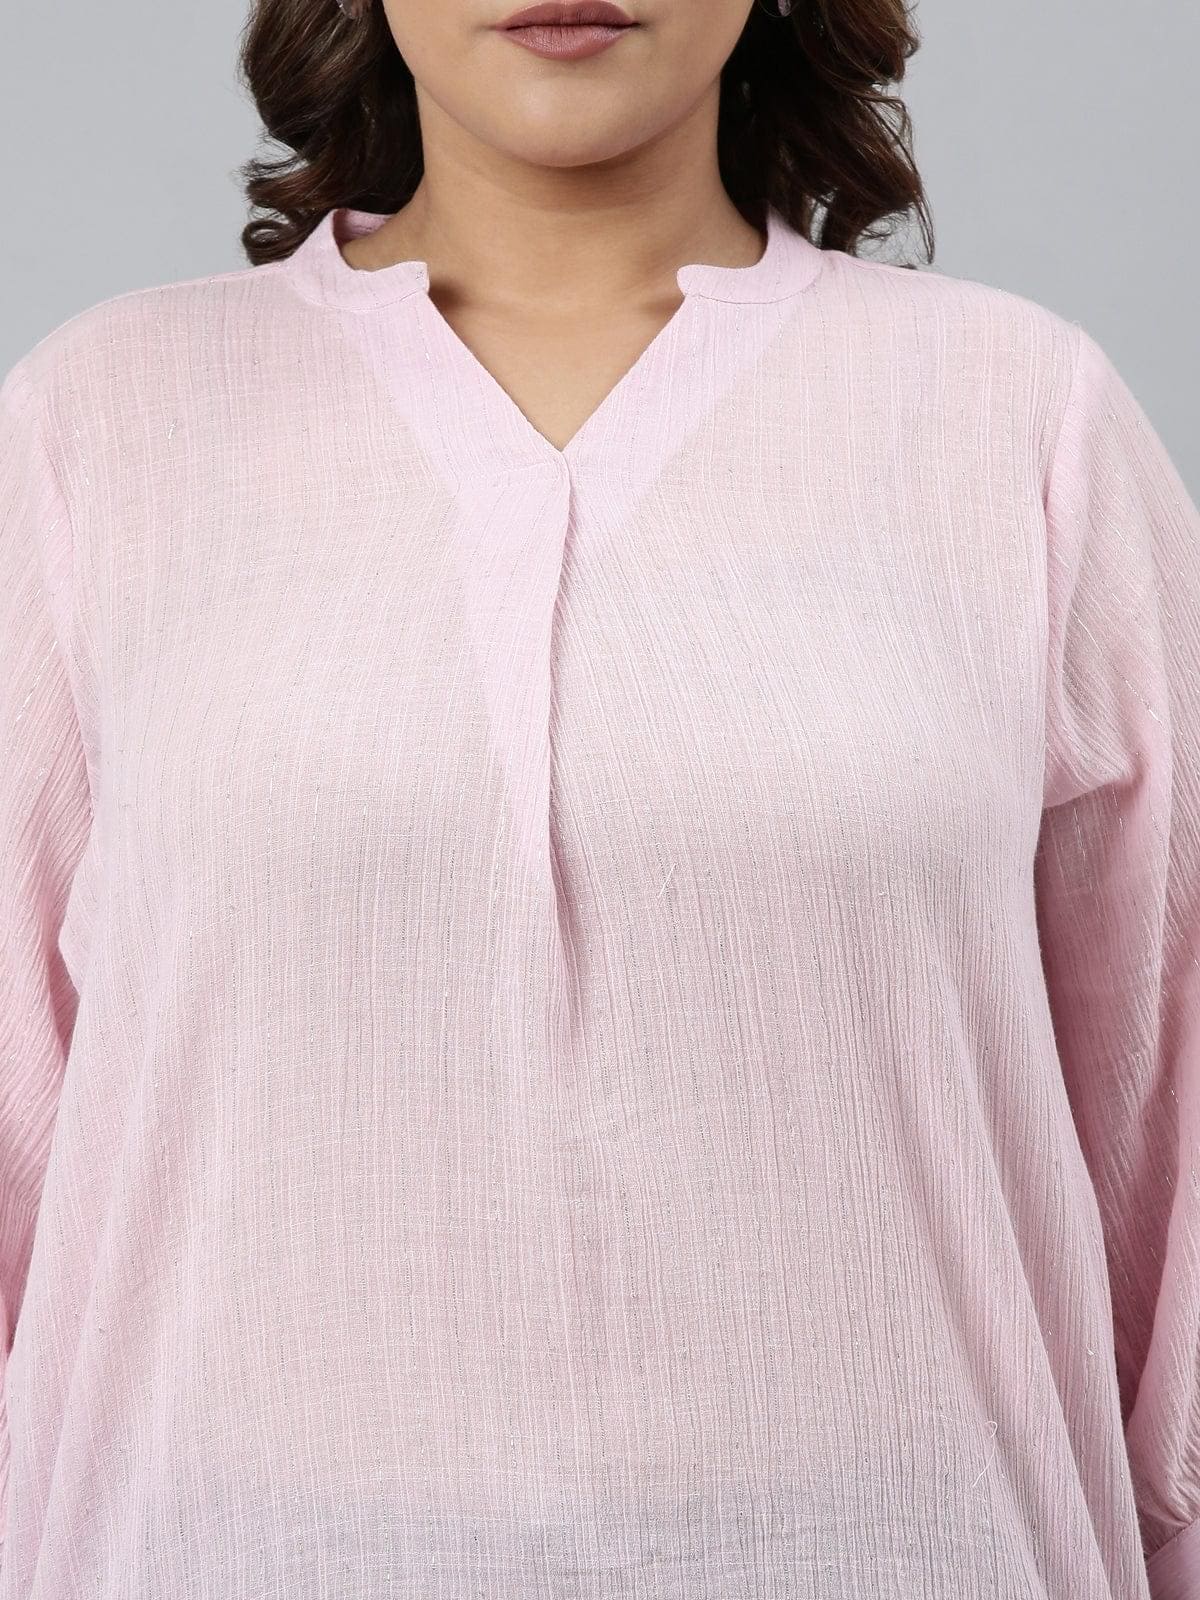 buy TheShaili PINK TOP at best prices   online India